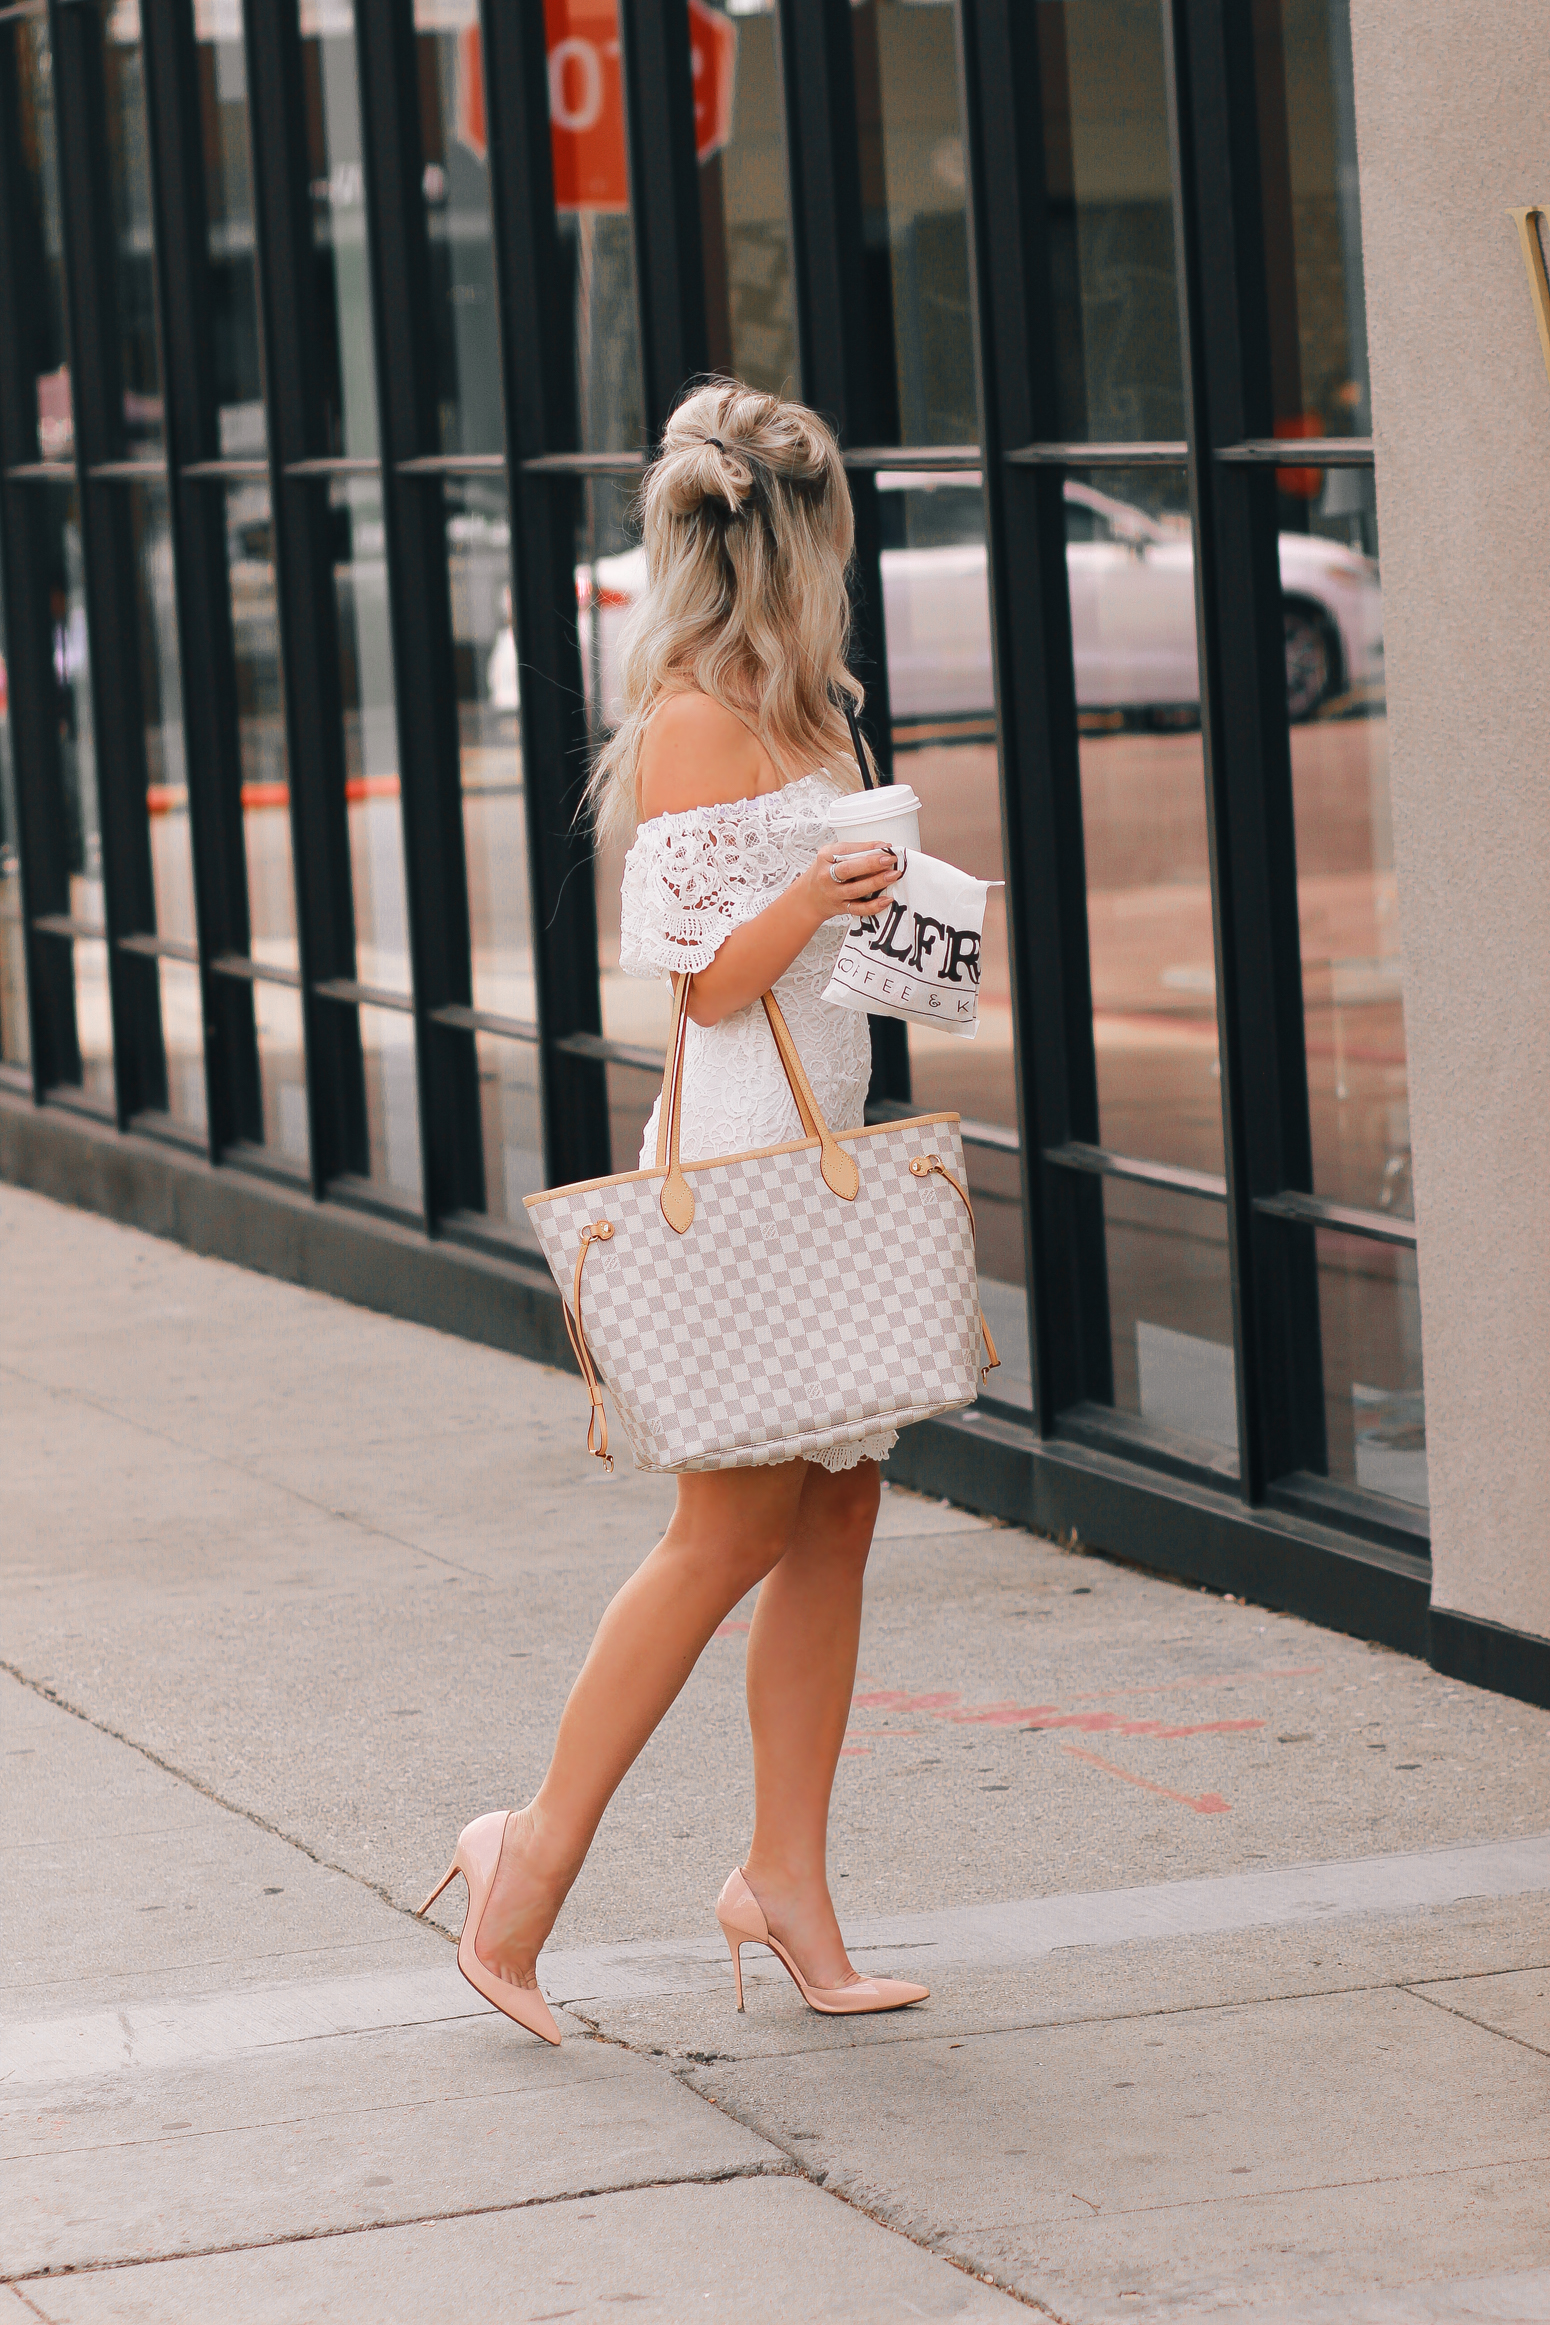 Blondie in the City | White Lace & Louis Vuitton